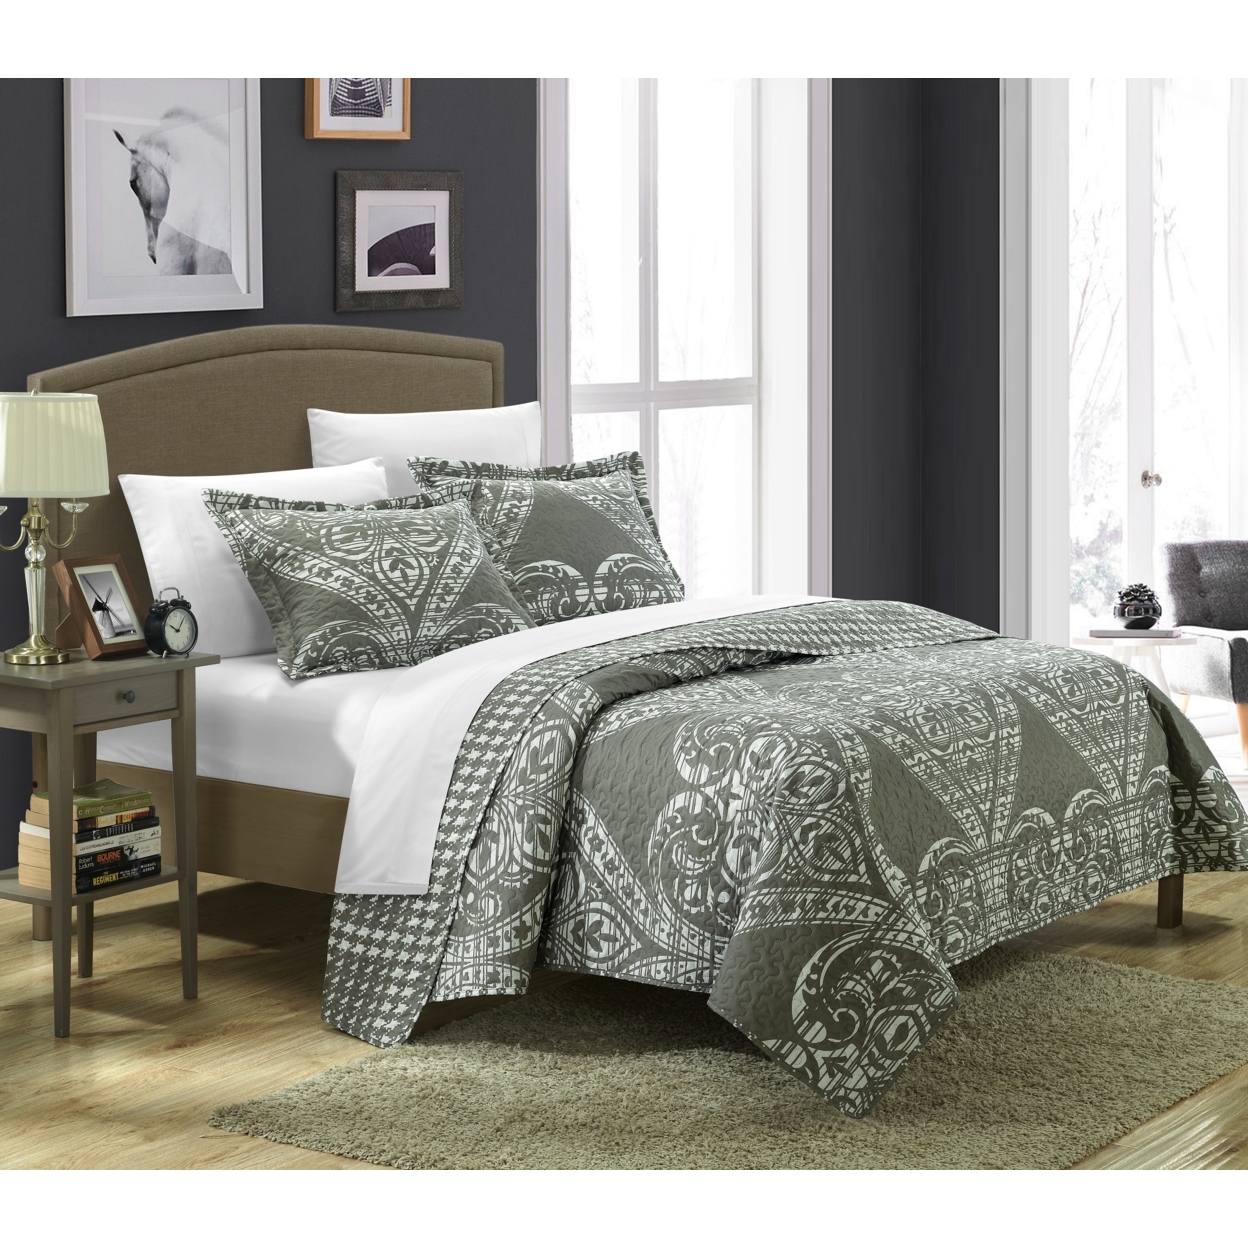 3 Or 2 Piece Revenna REVERSIBLE Printed Quilt Set. Front A Traditional Pattern And Reverses Into A Houndstooth Pattern - Beige, Queen